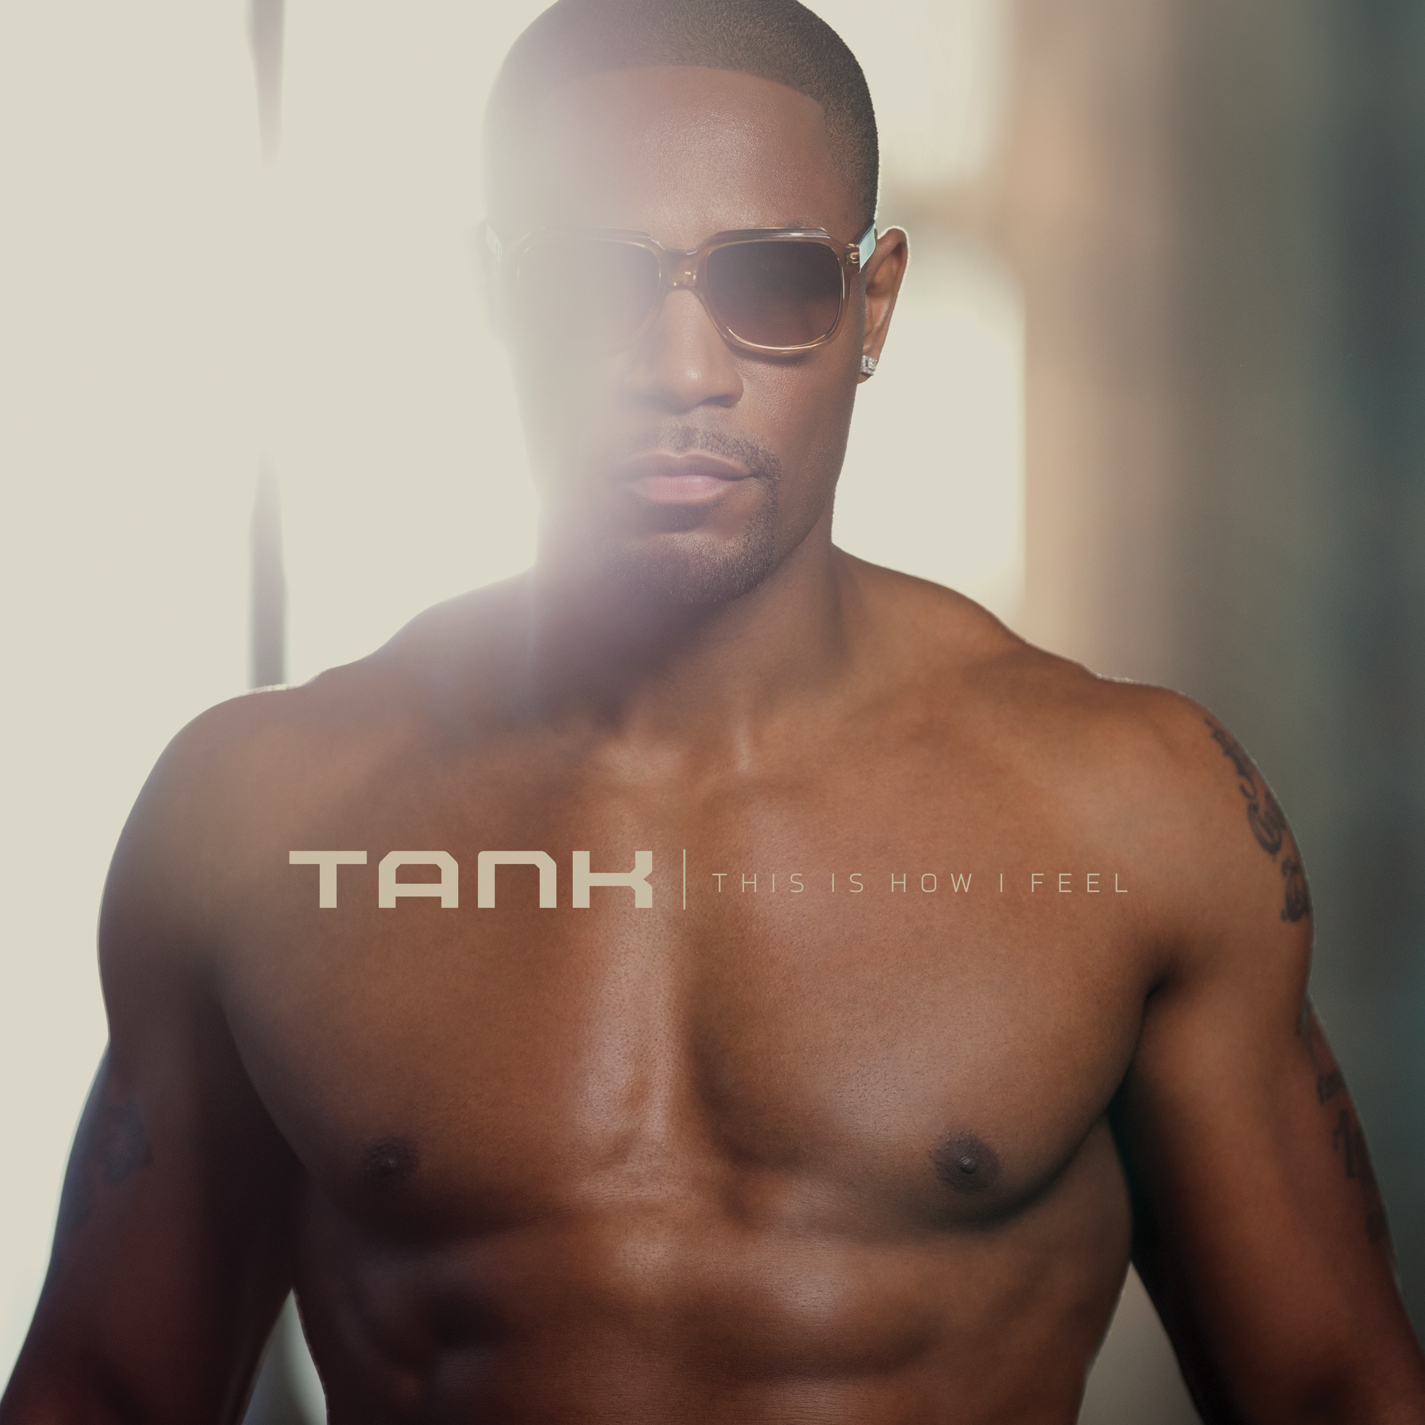 Tank "Lonely" featuring Chris Brown